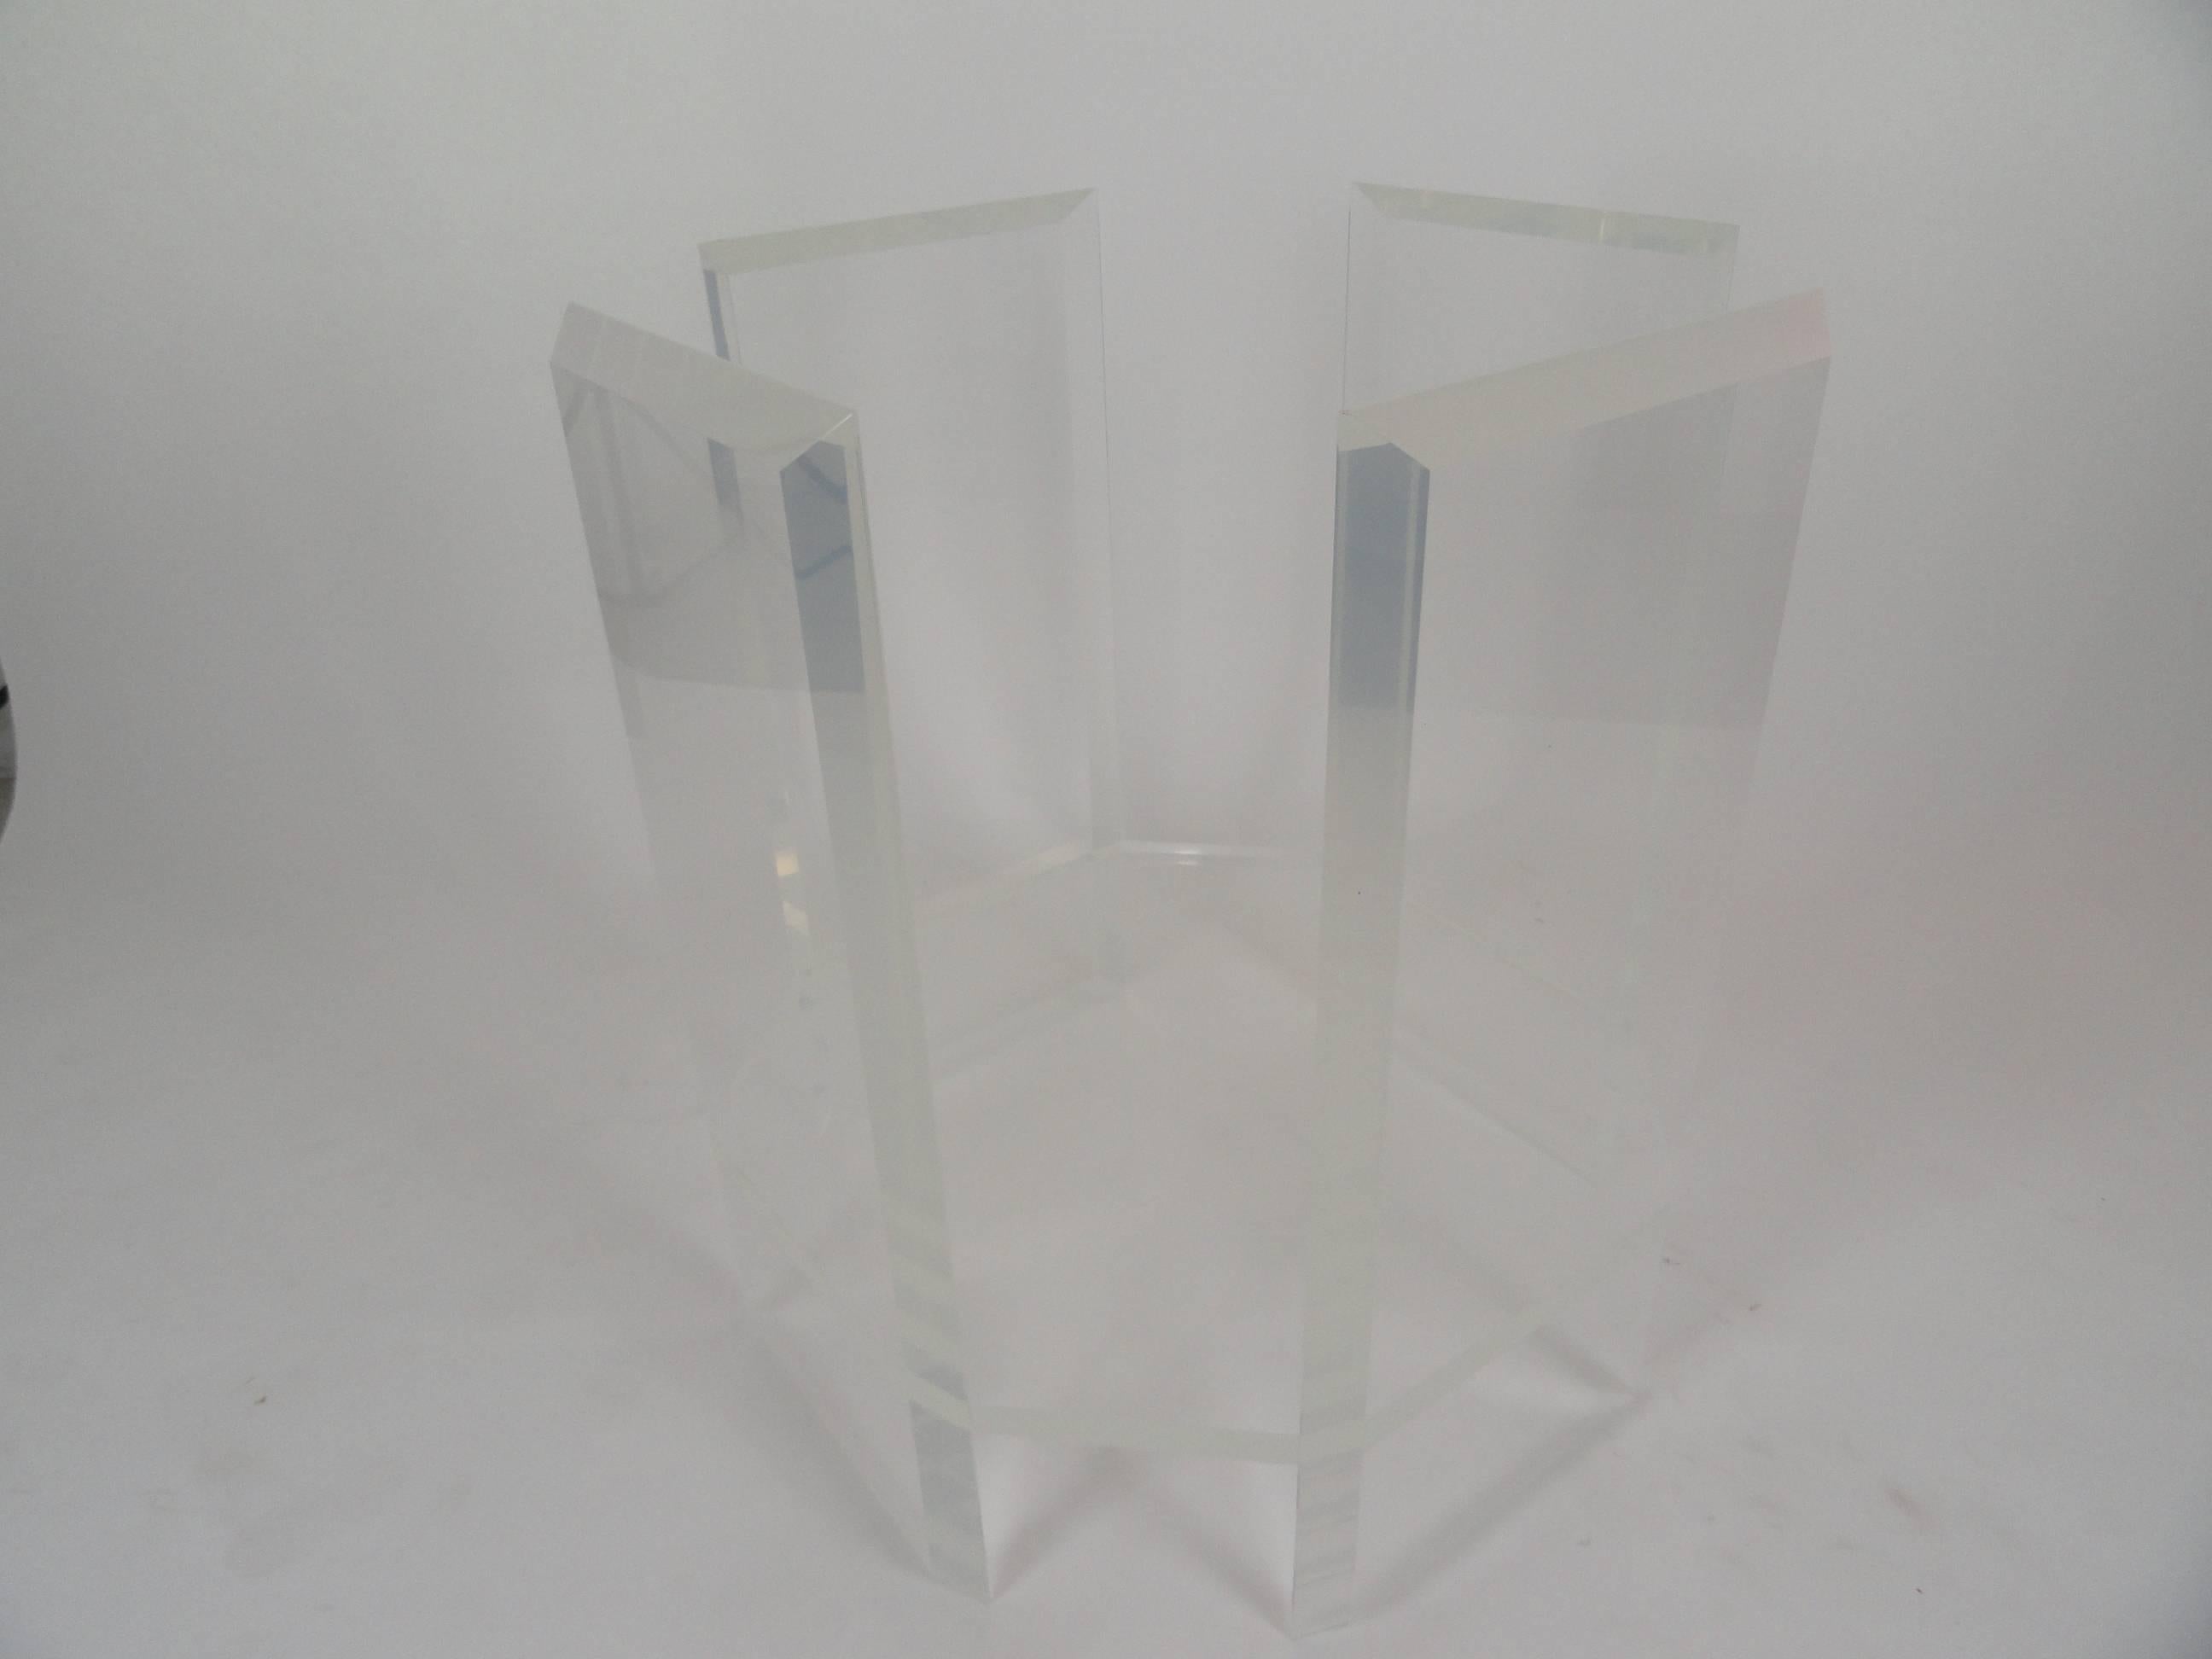 Jeffrey Bigelow Signed and Dated Acrylic Table Base In Excellent Condition For Sale In West Palm Beach, FL